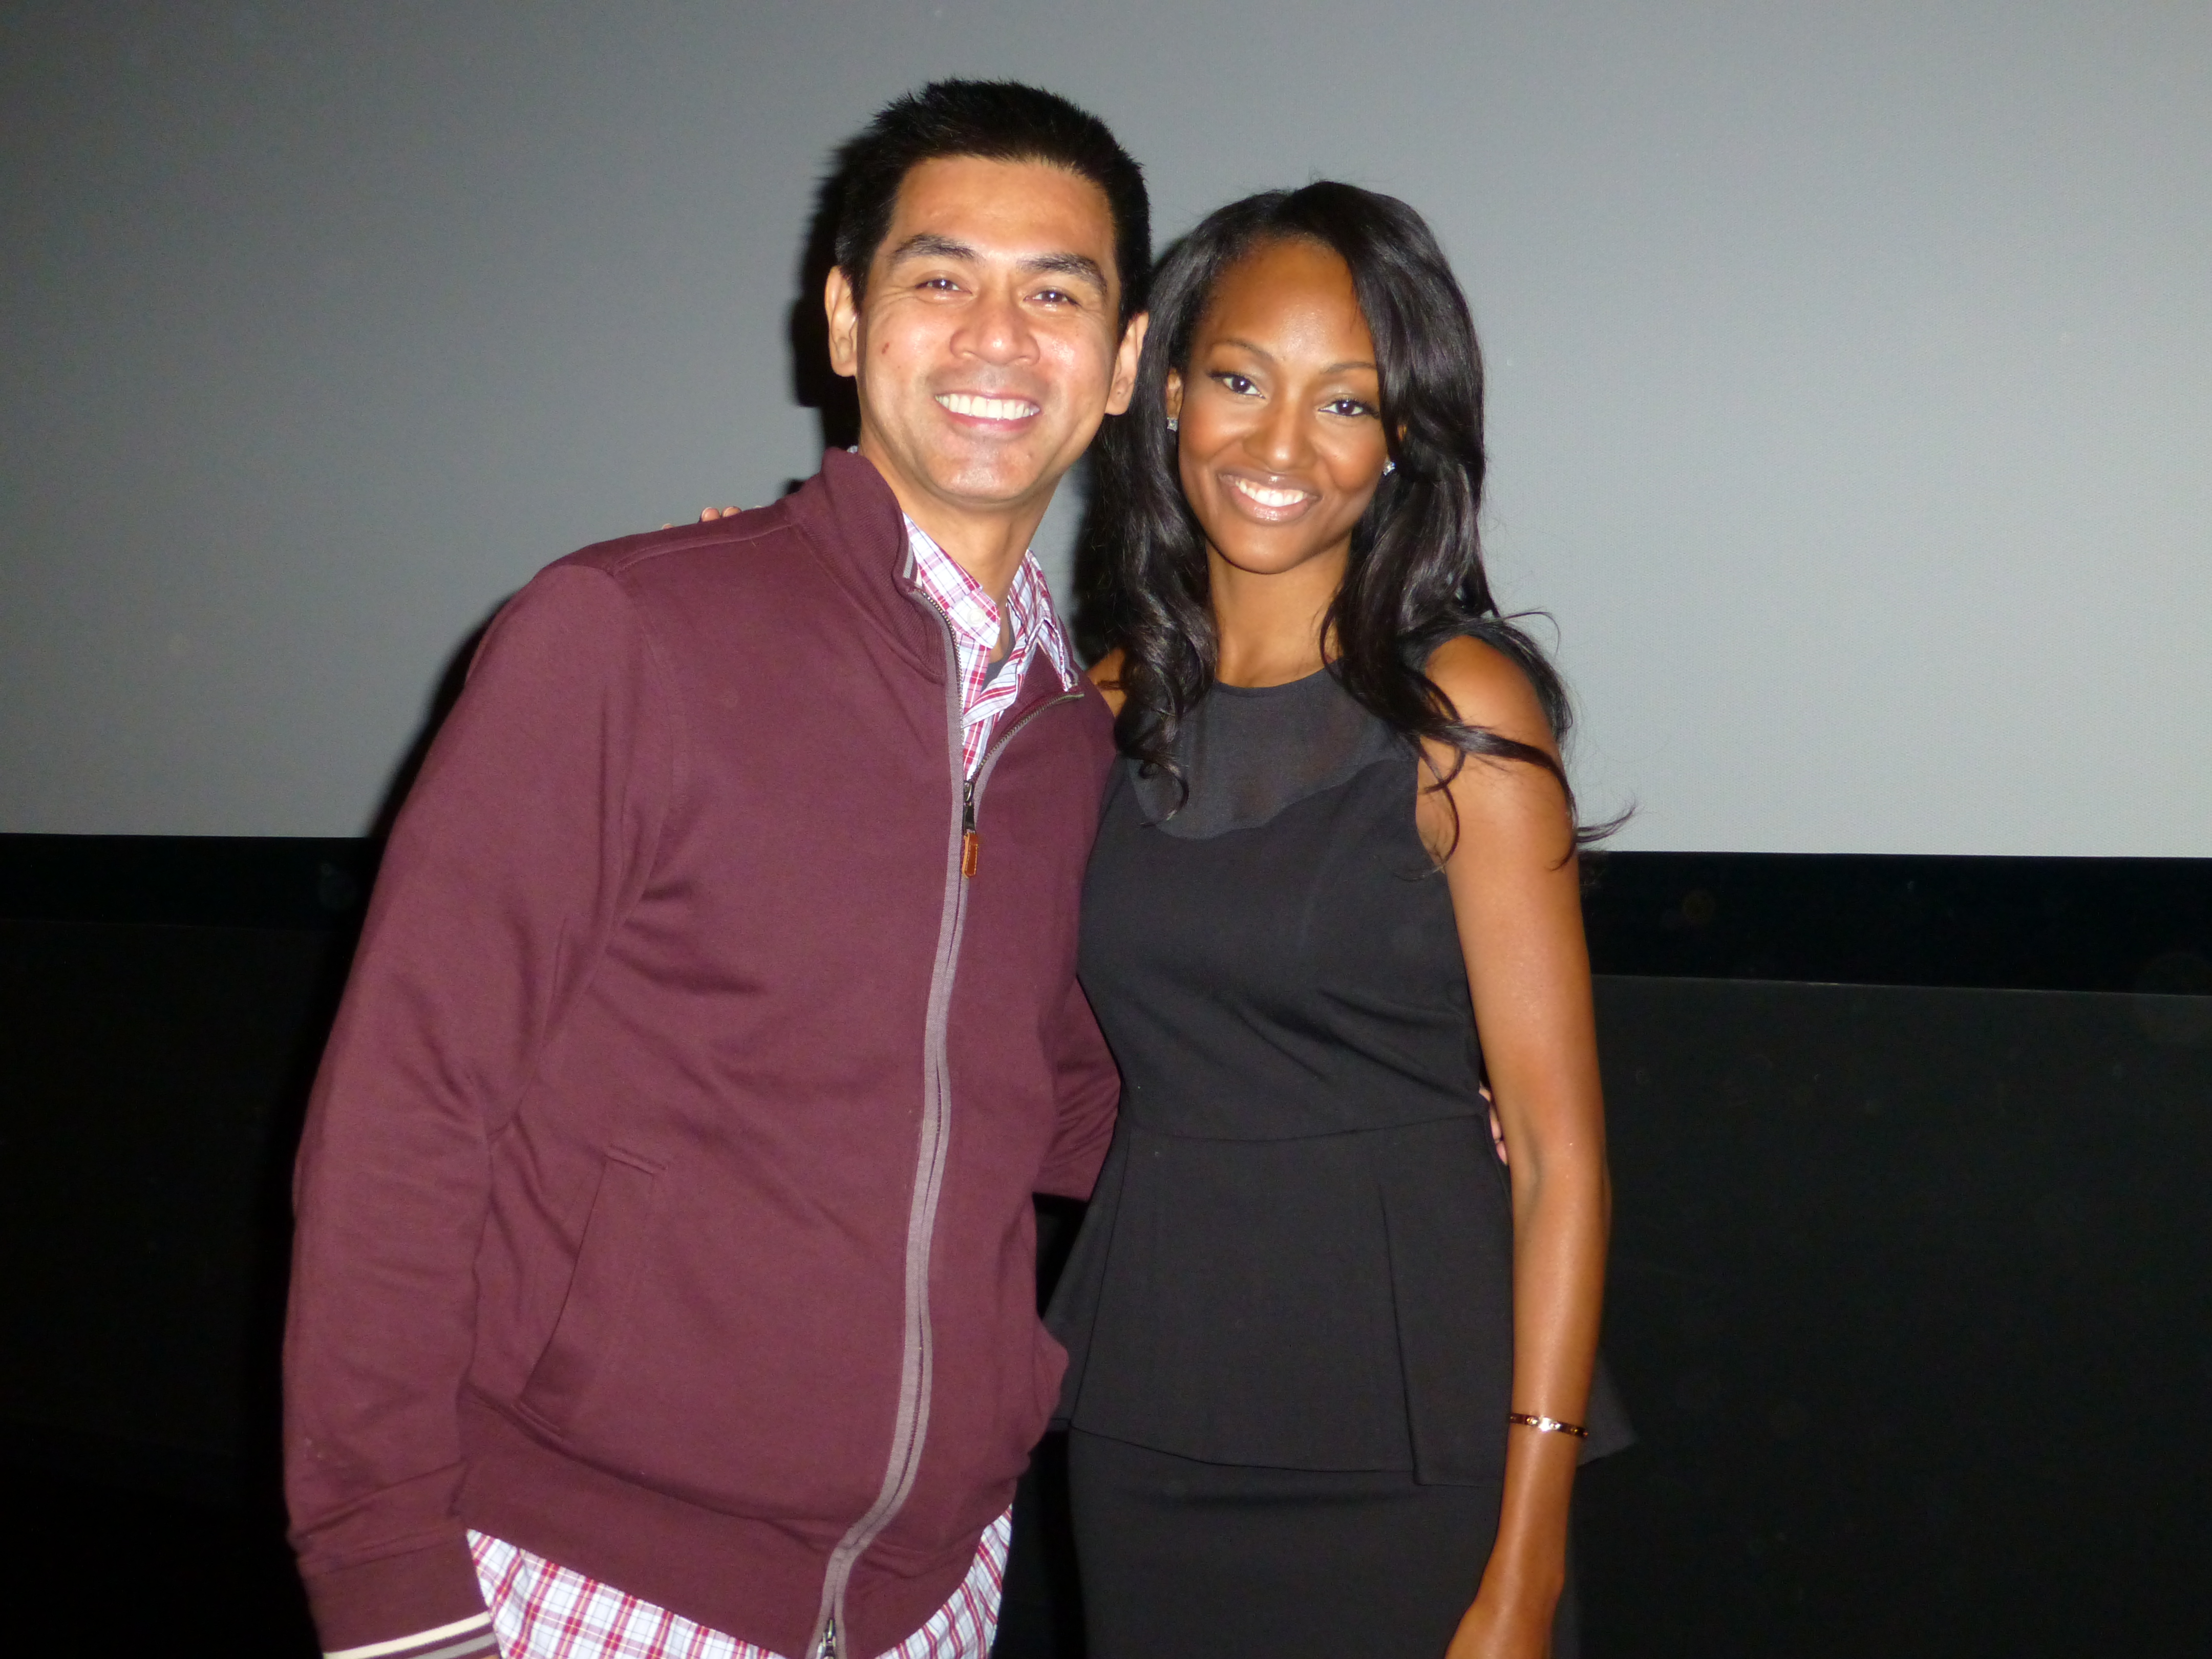 Nichole Galicia who plays Sheba after screening of Django Unchained in NYC